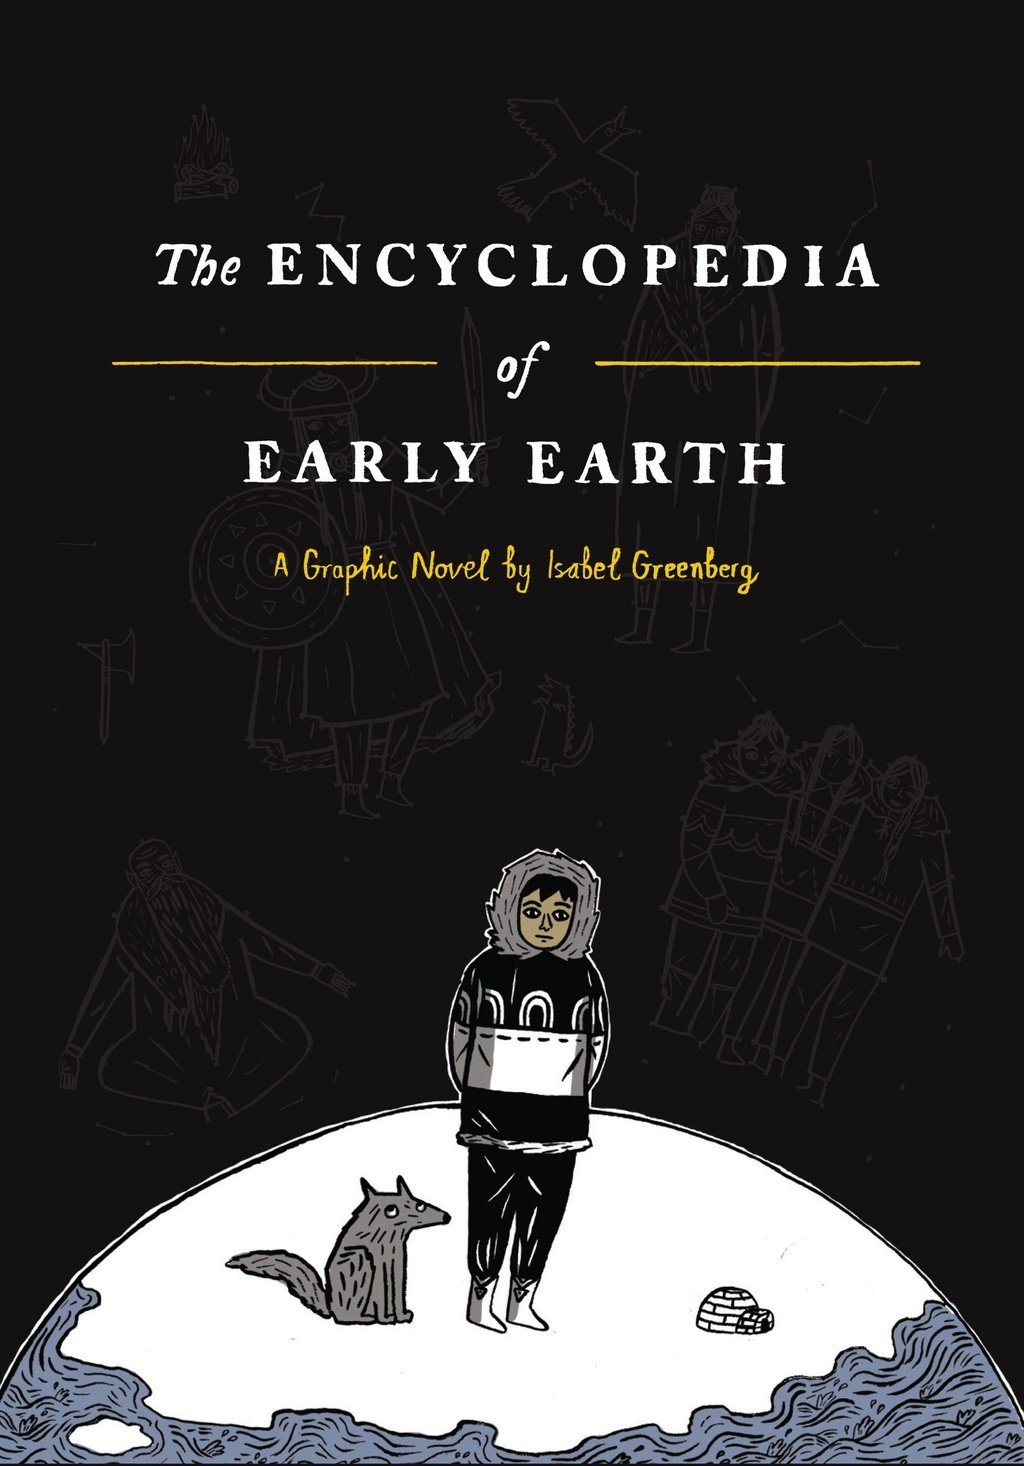 The 100 Best Comics of the Decade: The Encyclopedia of Early Earth